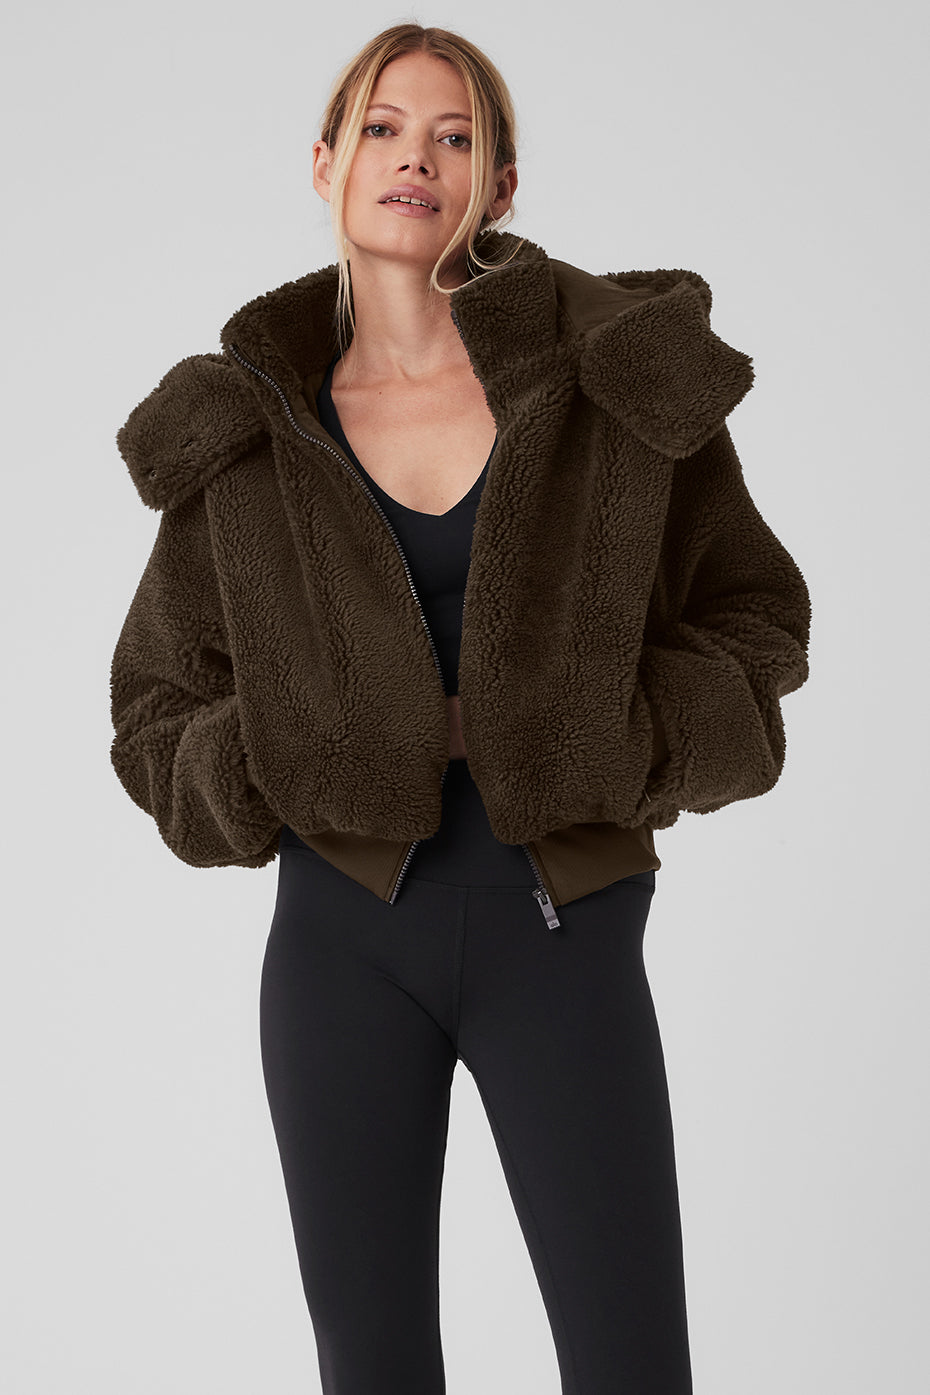 ALO YOGA FAUX FUR FOXY JACKET CHOCOLATE BROWN Removable Hoodie Full Zip Sz  Small